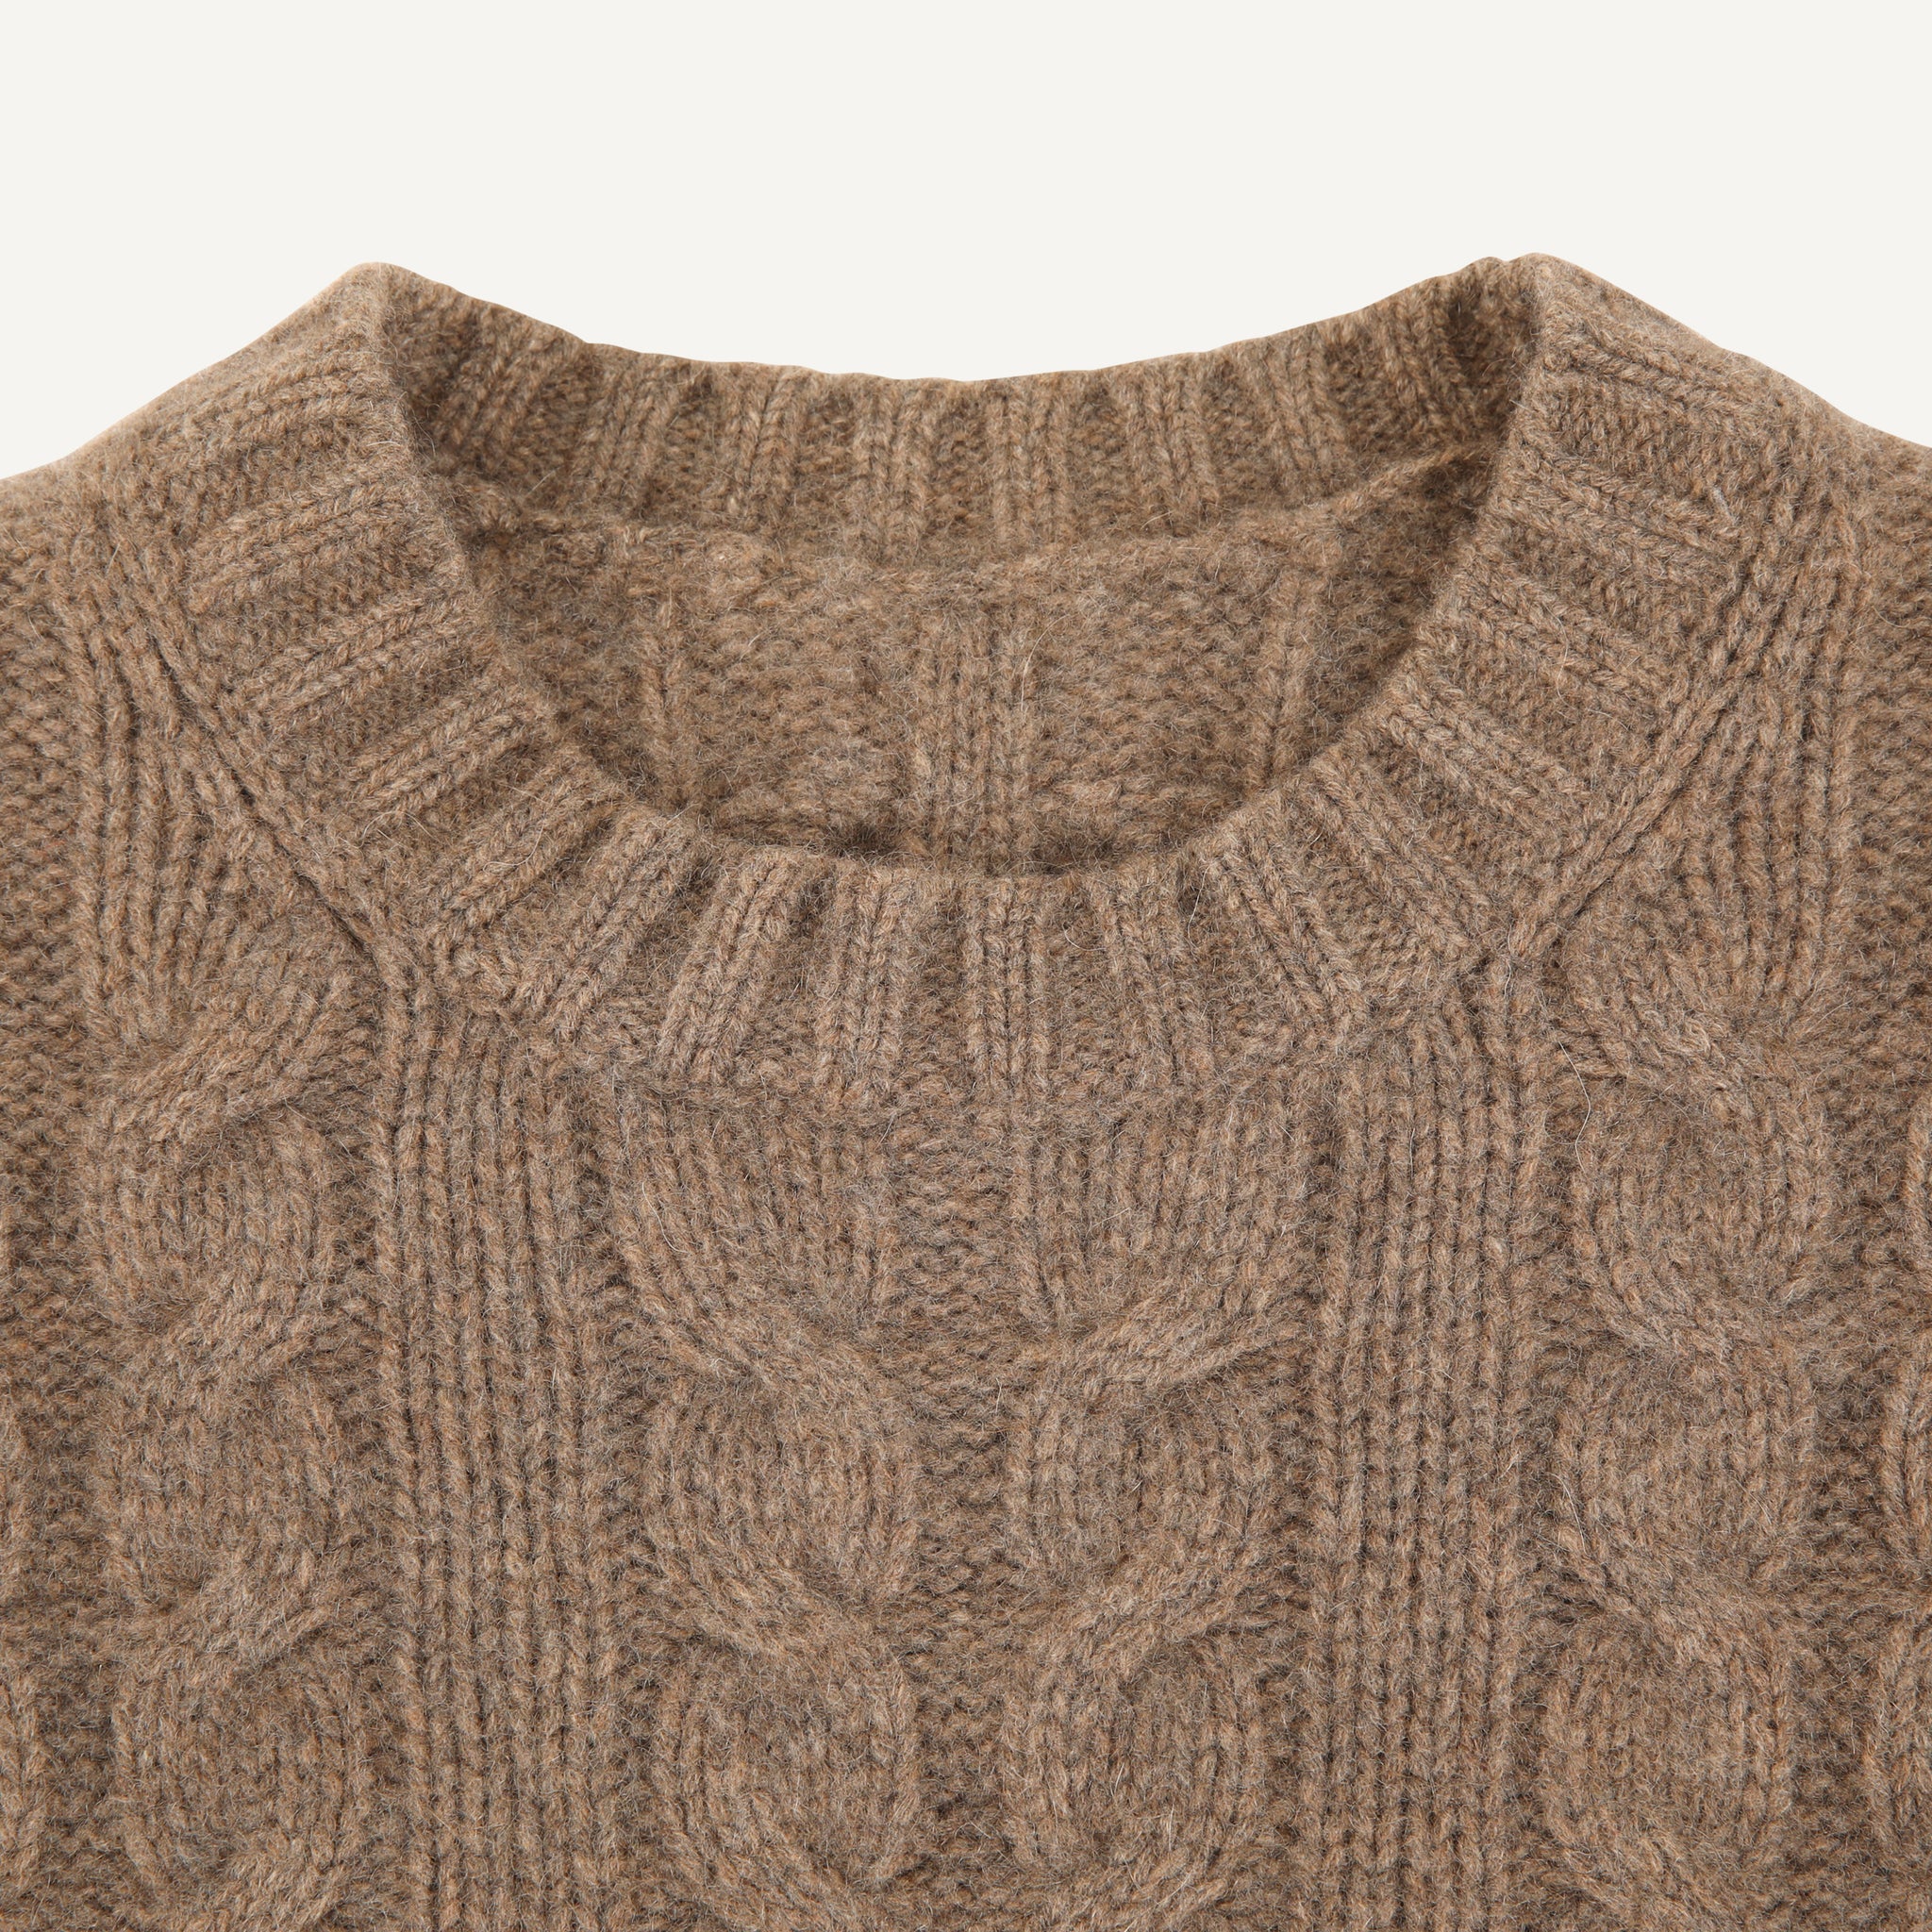 VINTAGE CASHMERE CABLE KNIT SWEATER